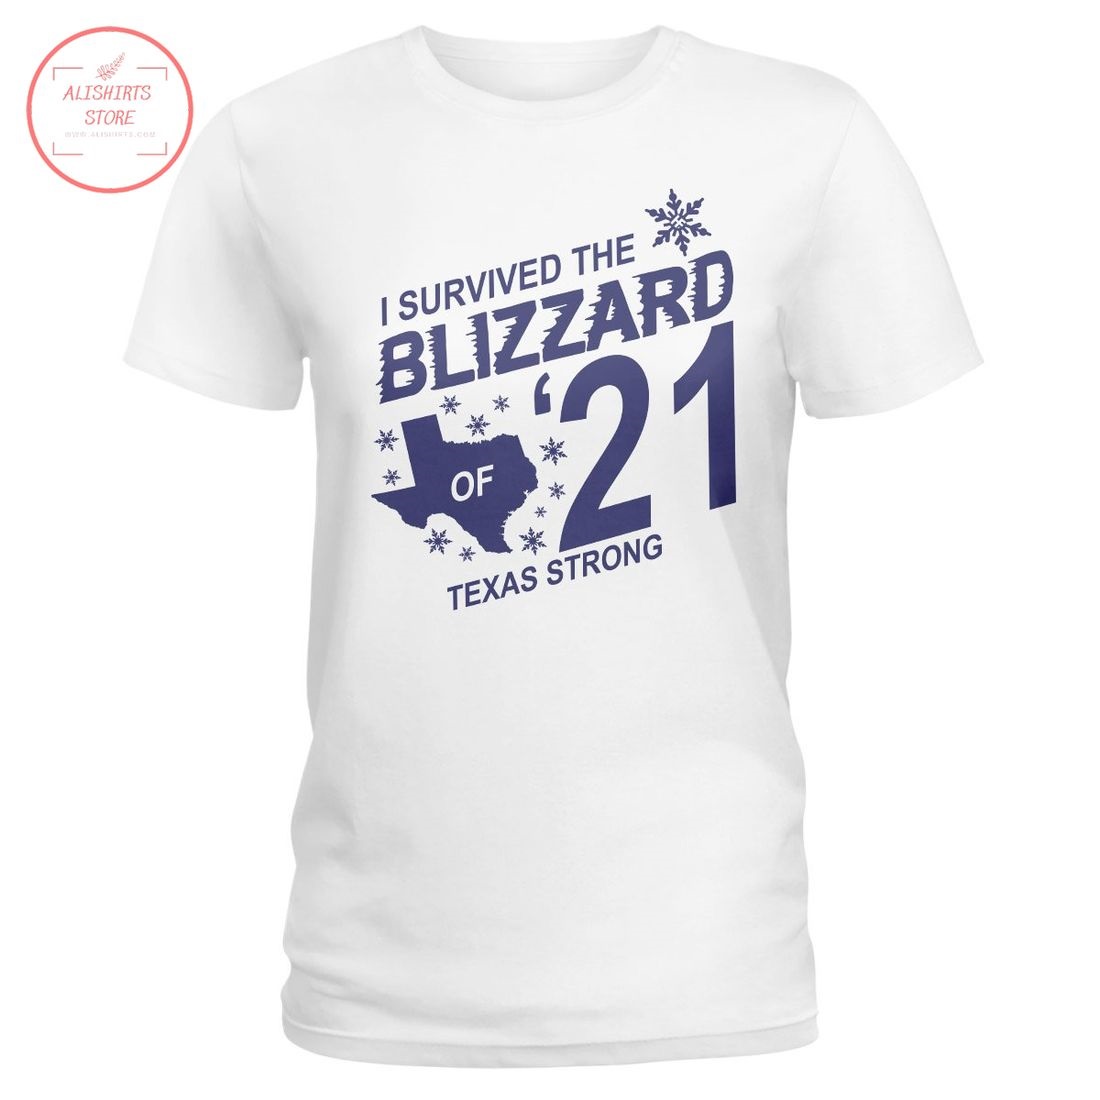 I Survived The Blizzard 21 Shirt